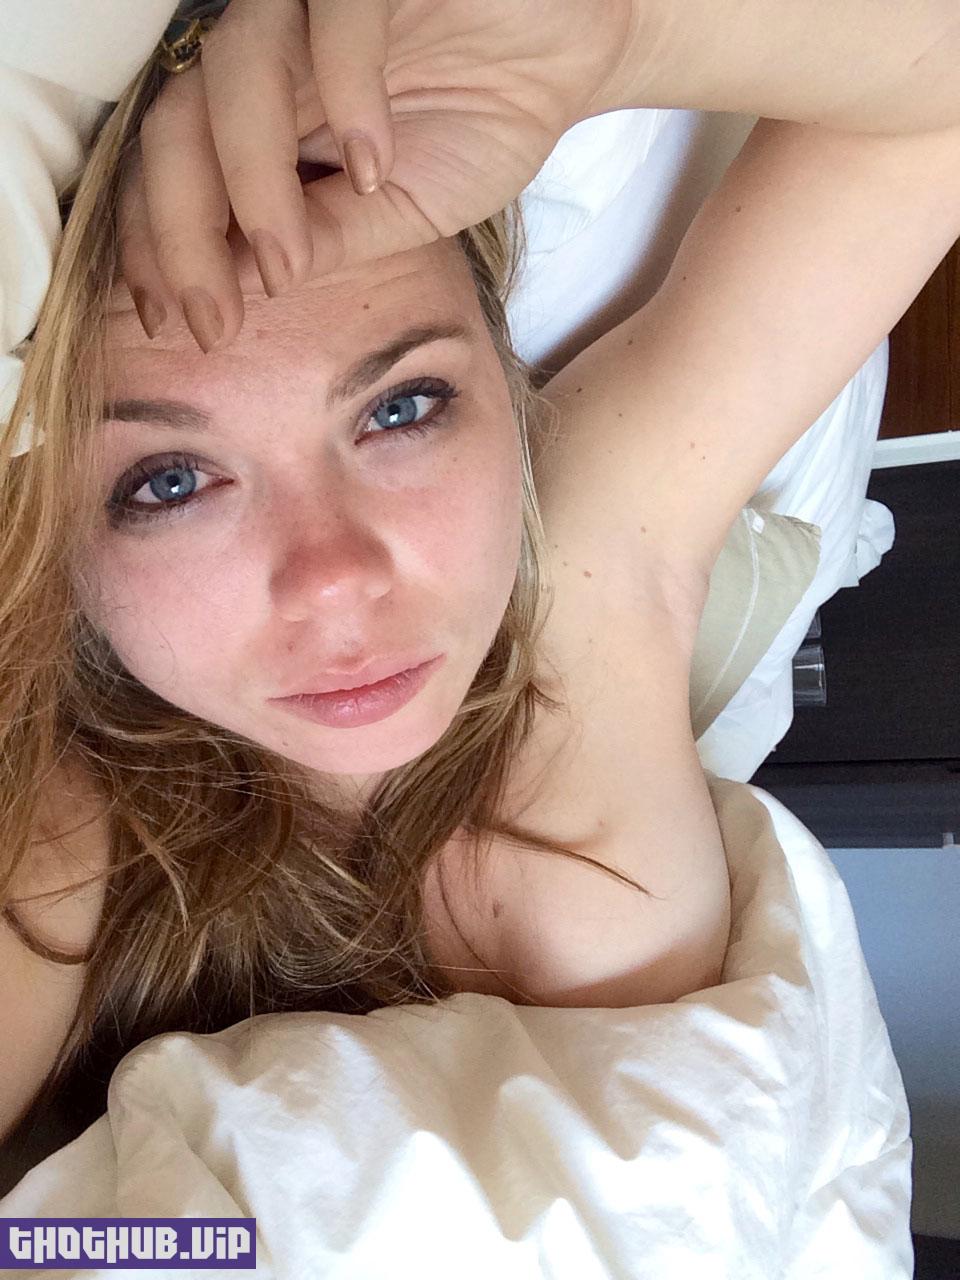 Grey's Anatomy Actress Amanda Fuller Nude Photos Leaked from iCloud by The Fappening